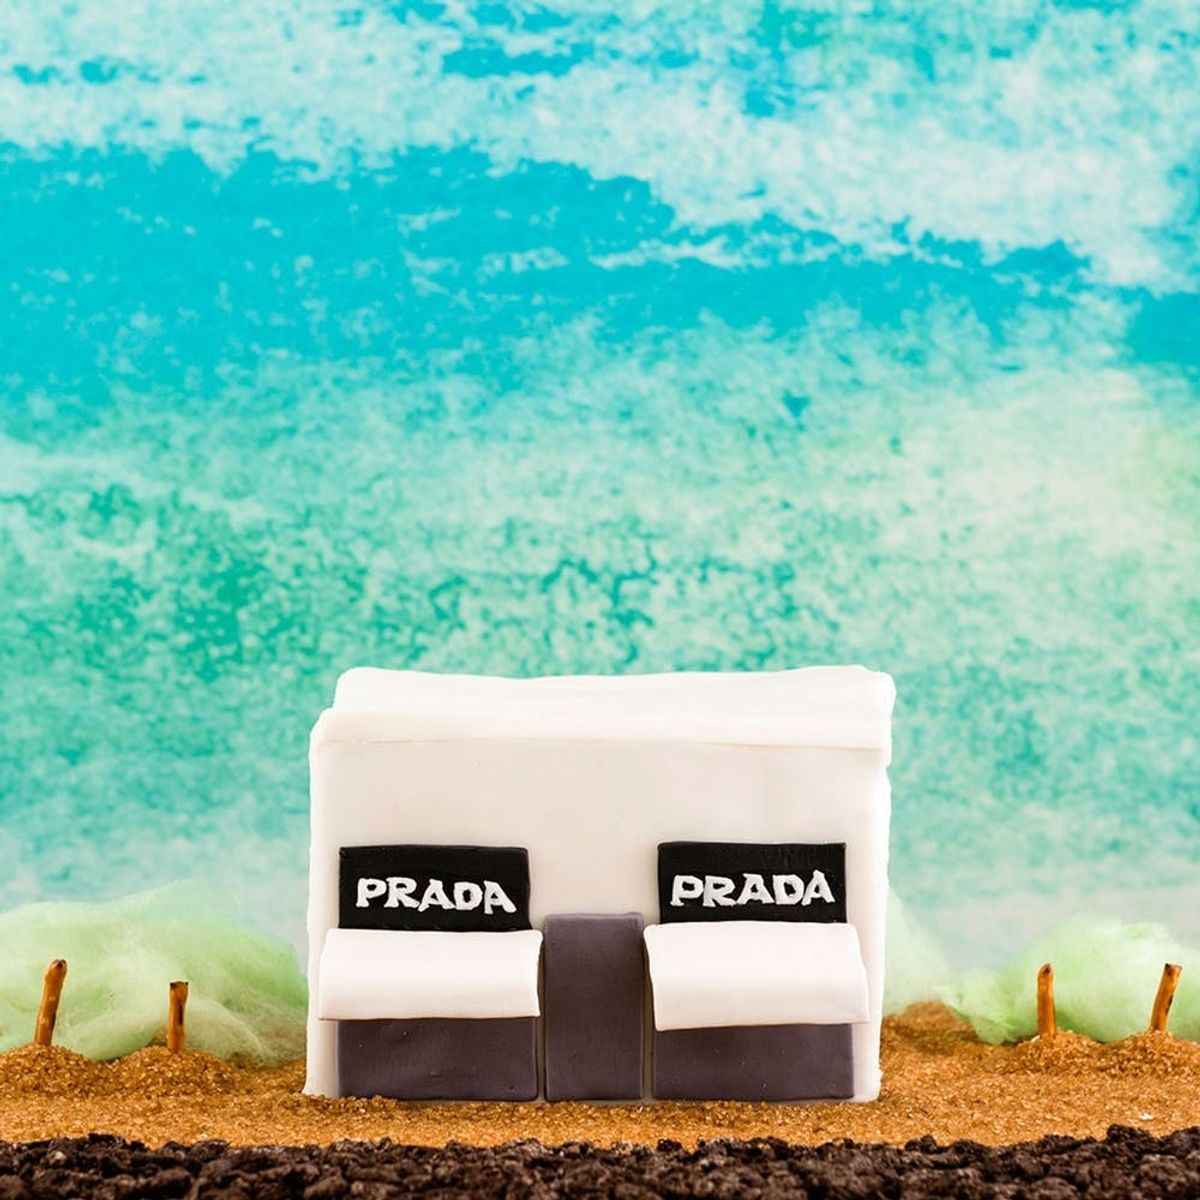 This Marfa Prada Gingerbread House Will Give You All the Hipster Feels